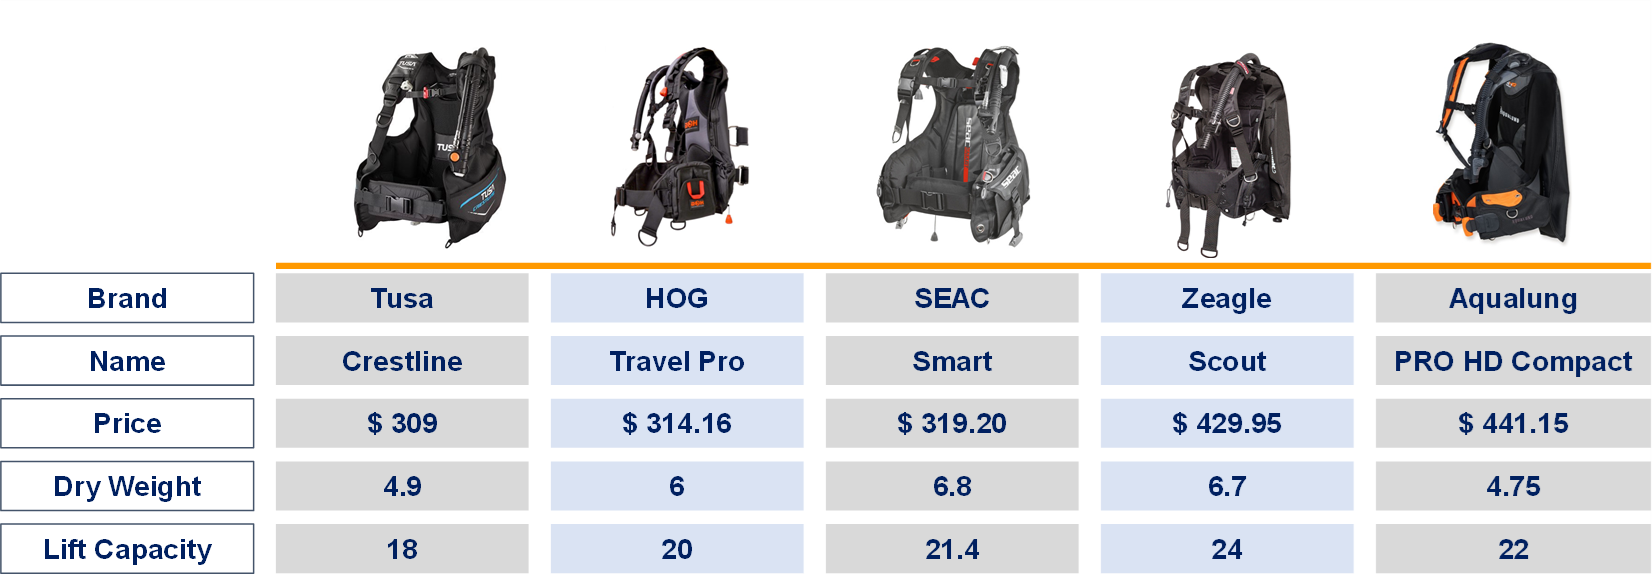 Travel BCDs ranked by price